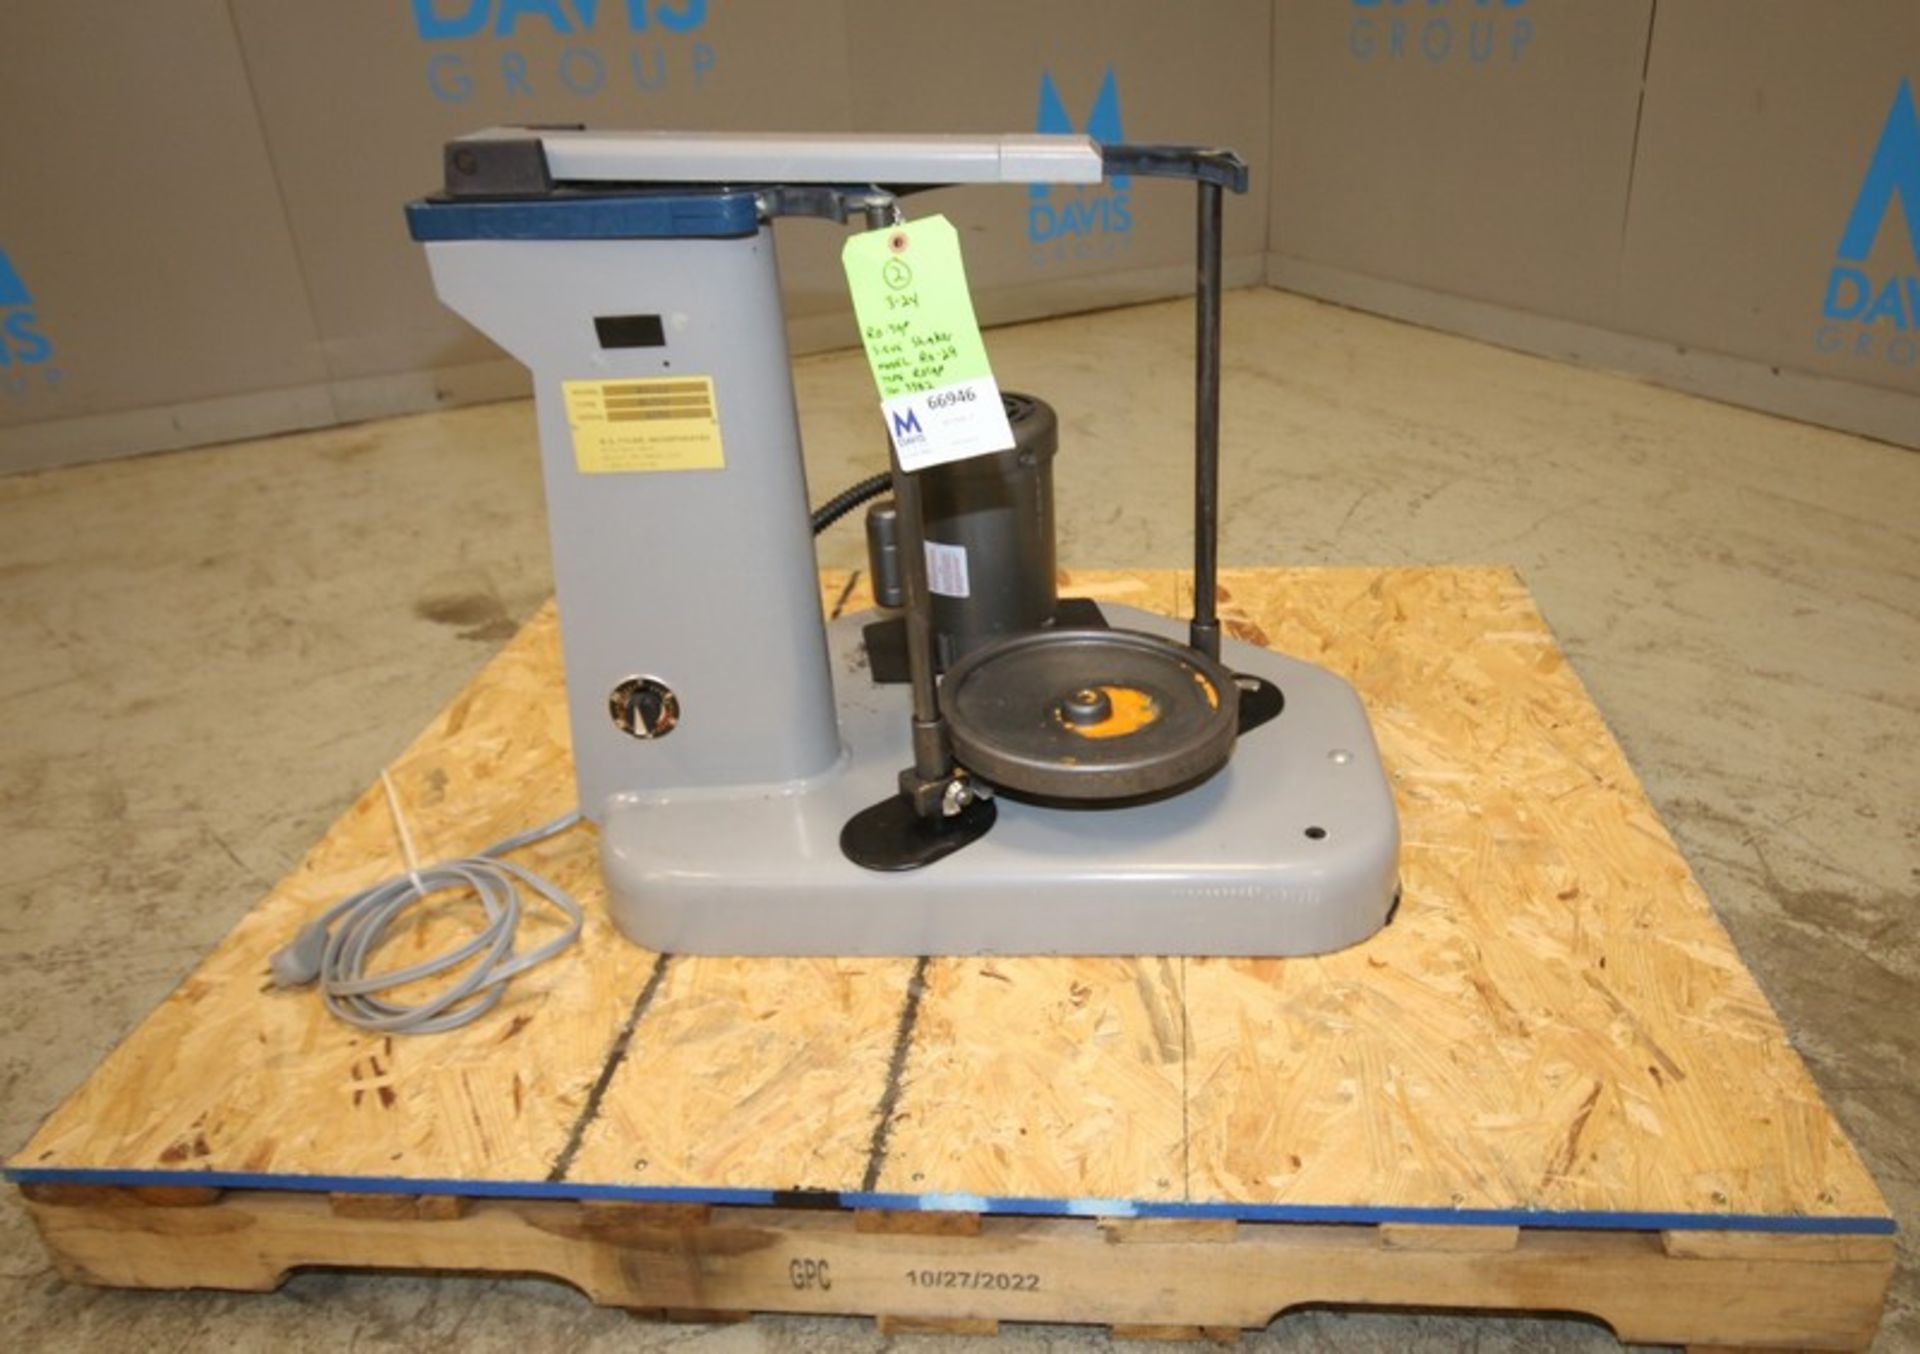 W.S. Tyler Ro-Tap Sieve Shaker, Model RX-29- Type ROTAP, SN 3382, 110V (INV#66946) (Located @ the